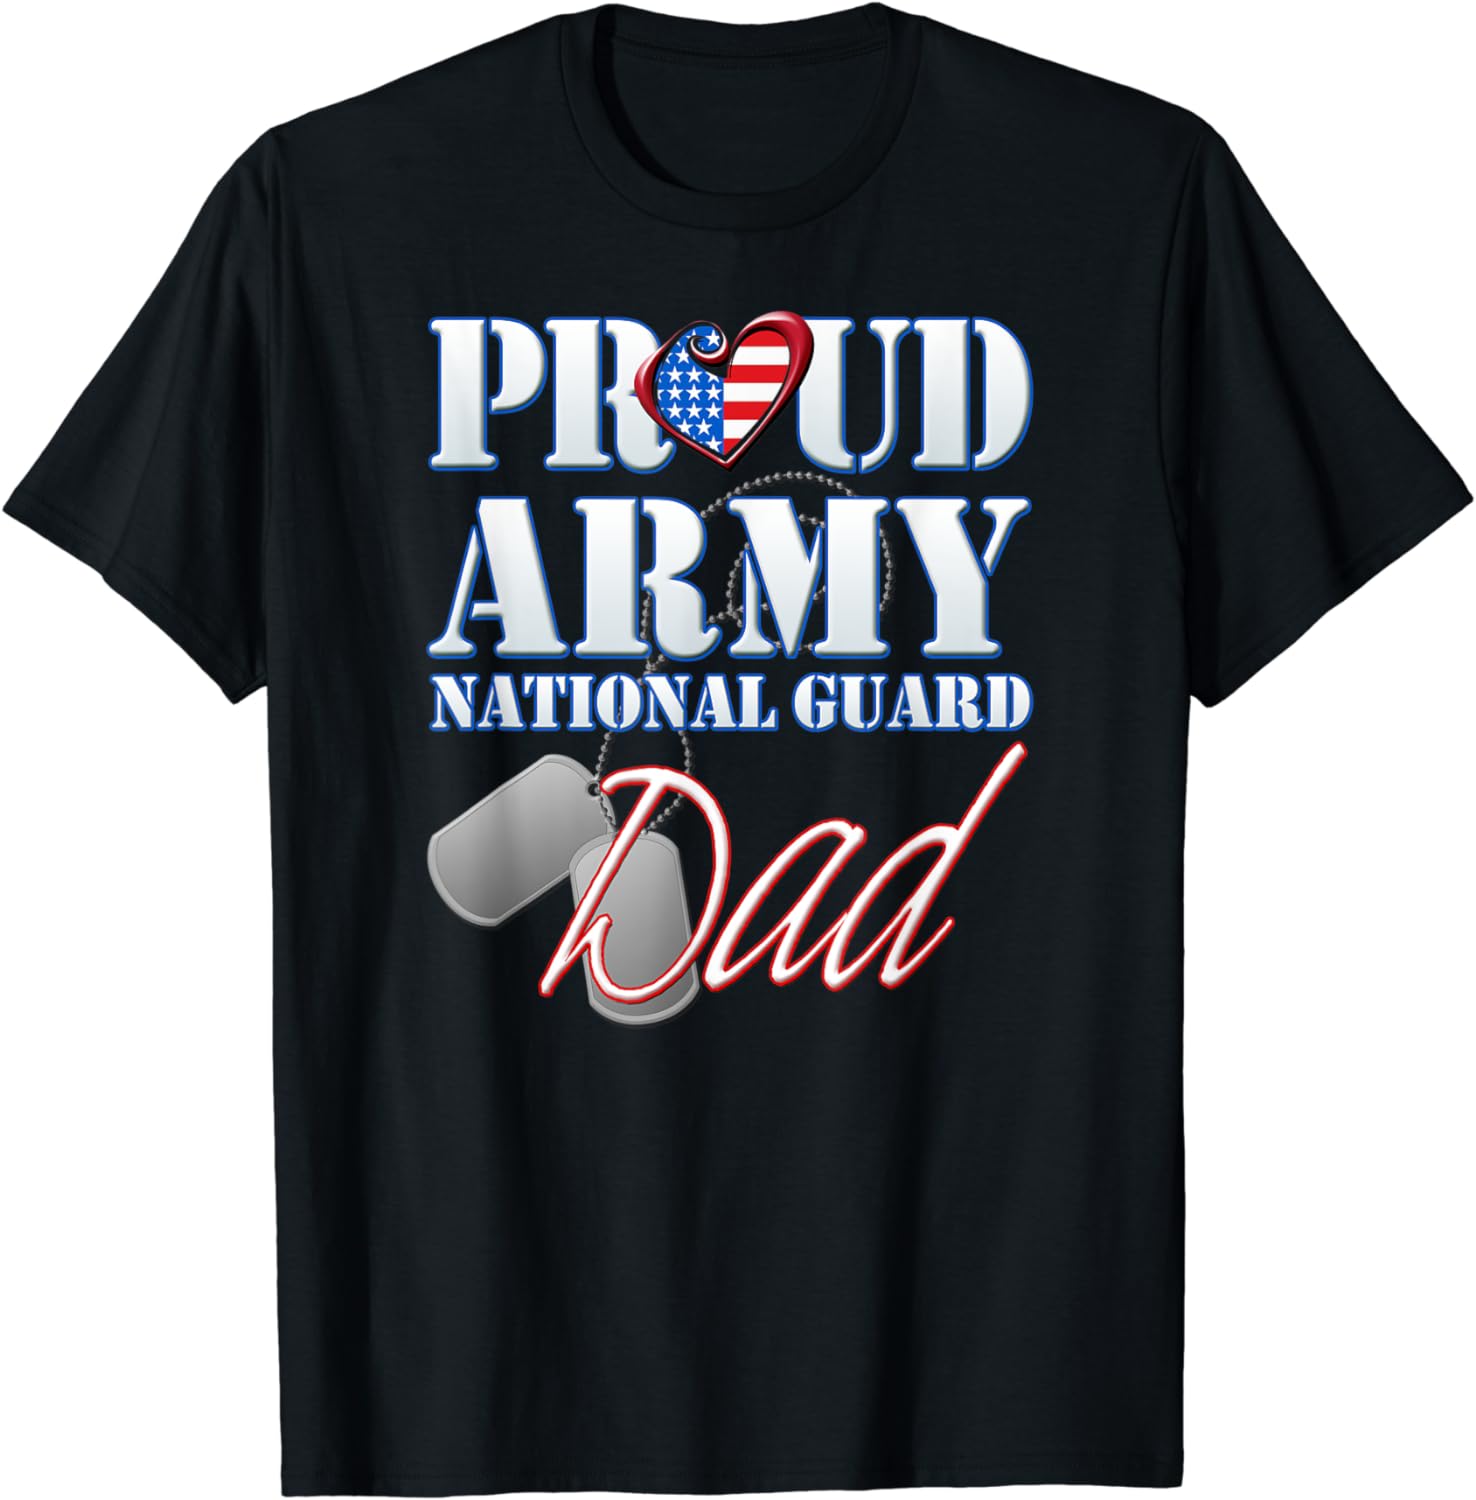 Proud Army National Guard Dad USA Heart Shirt Fathers Day,Women Crew ...